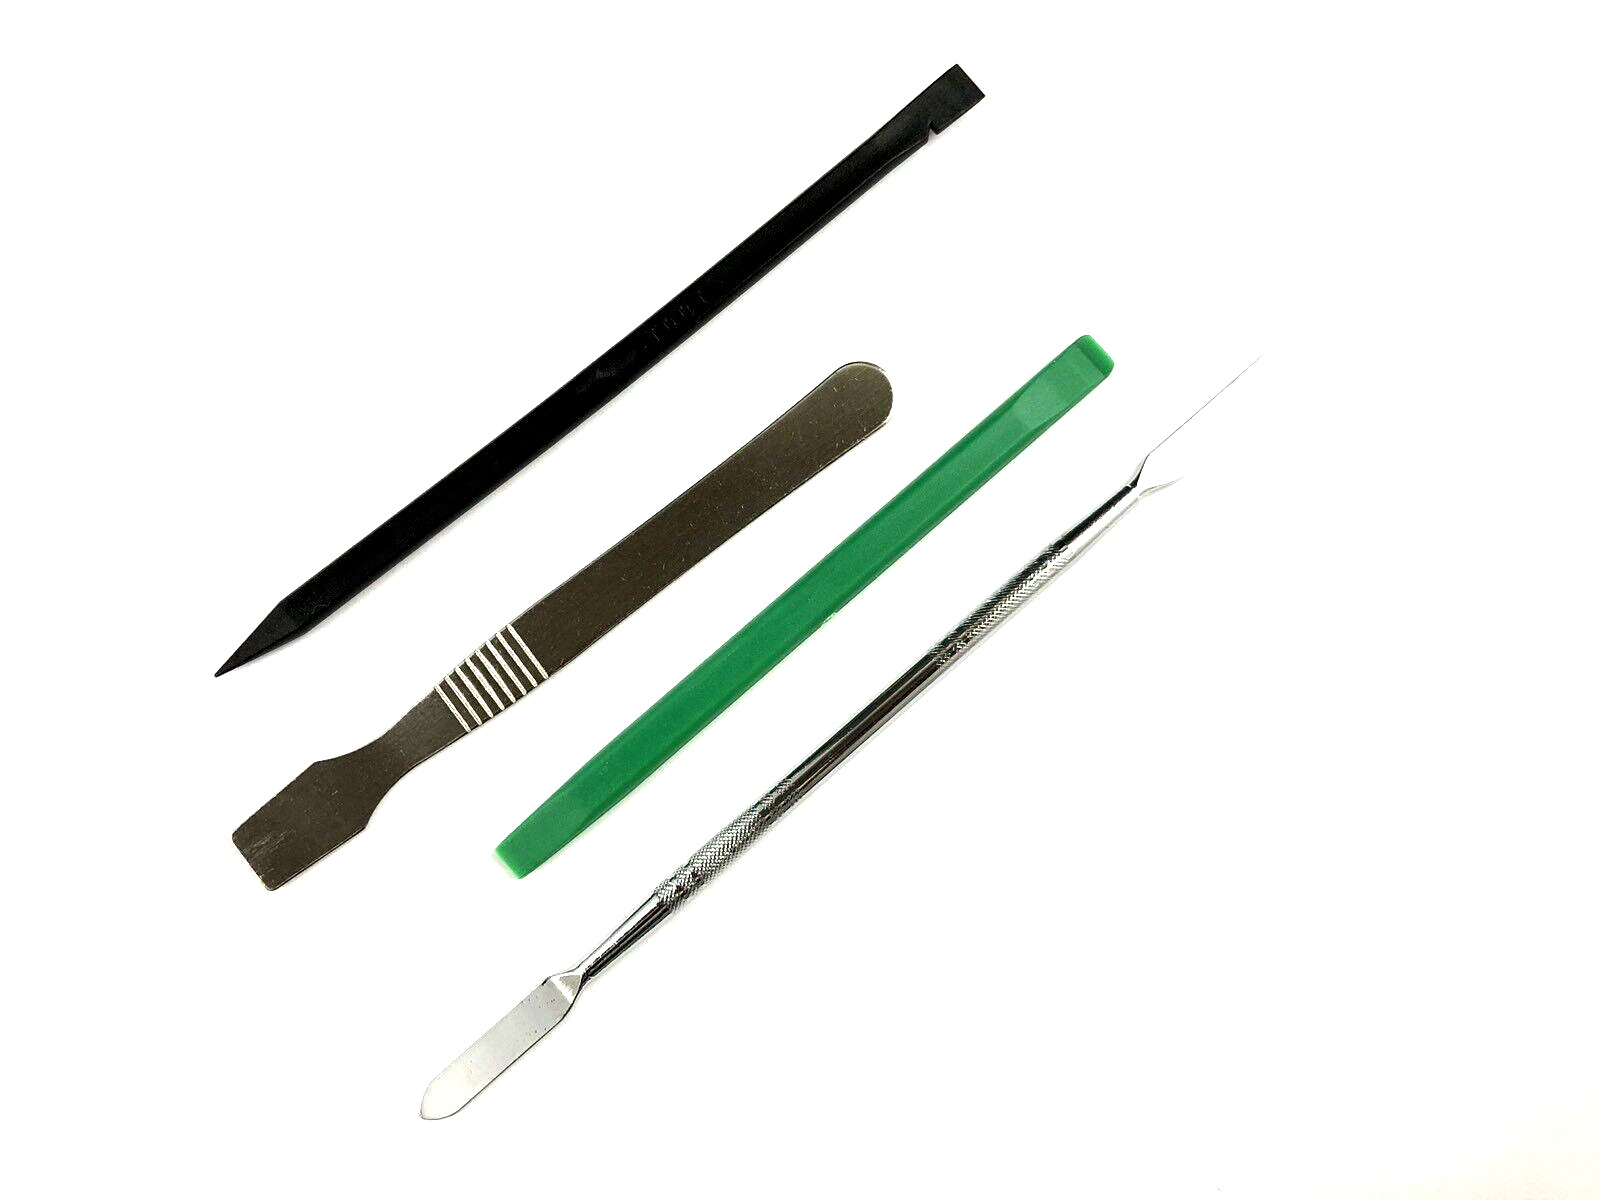 4X Metal Spudger Repair Opening Pry Tool for Touch4 iPod iPad iPad2 iPhone 4 3GS